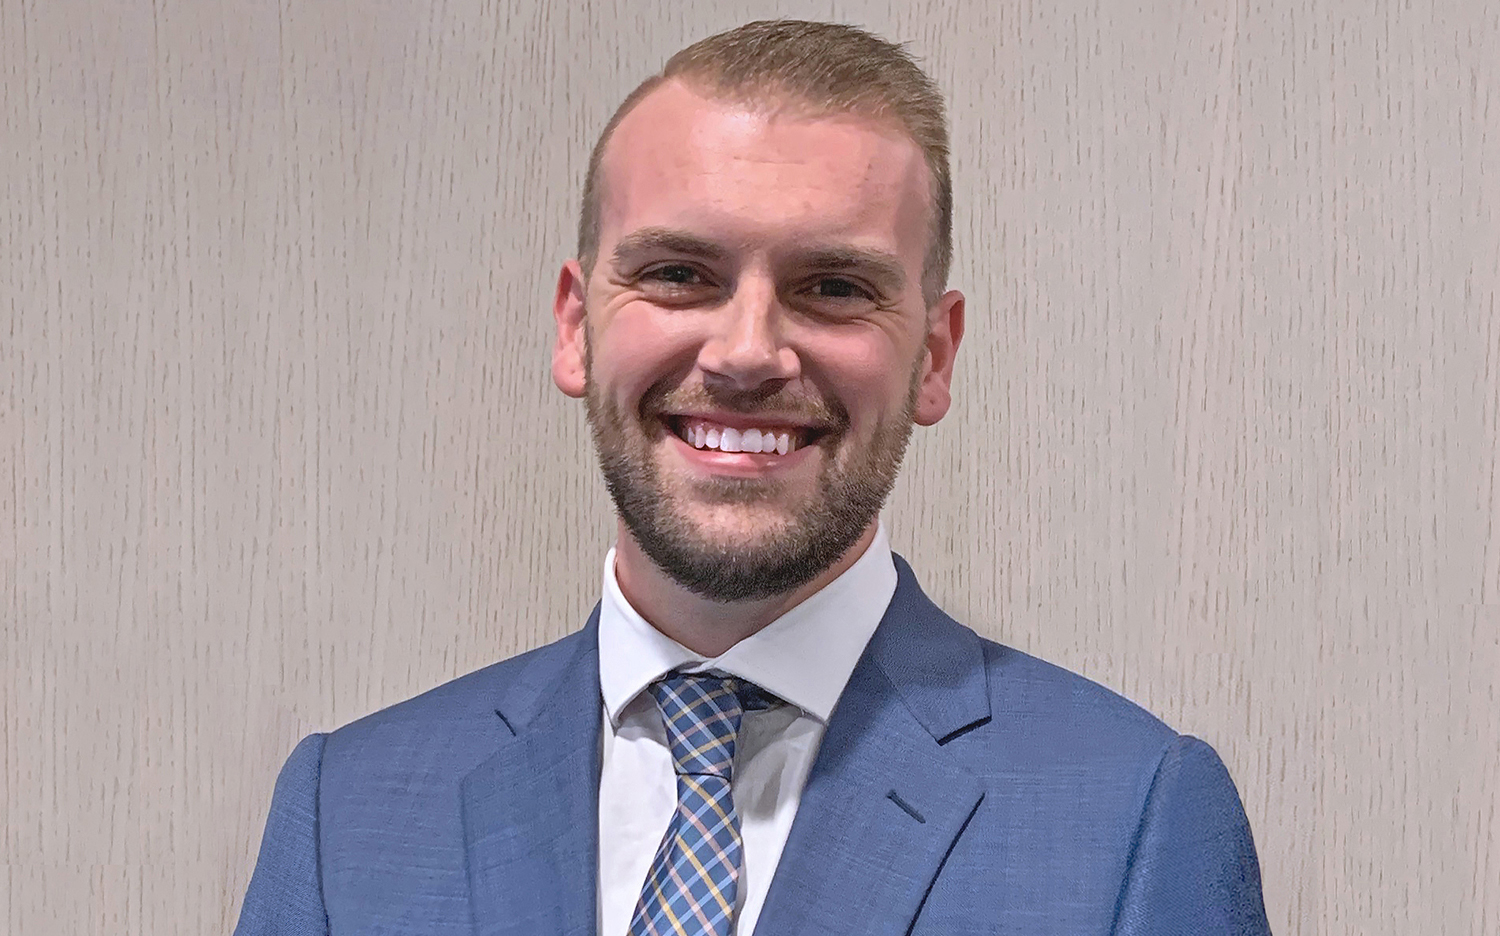 Corporate Recruiter Tyler Soucy on building his skills and career path at Whittier Health Network.